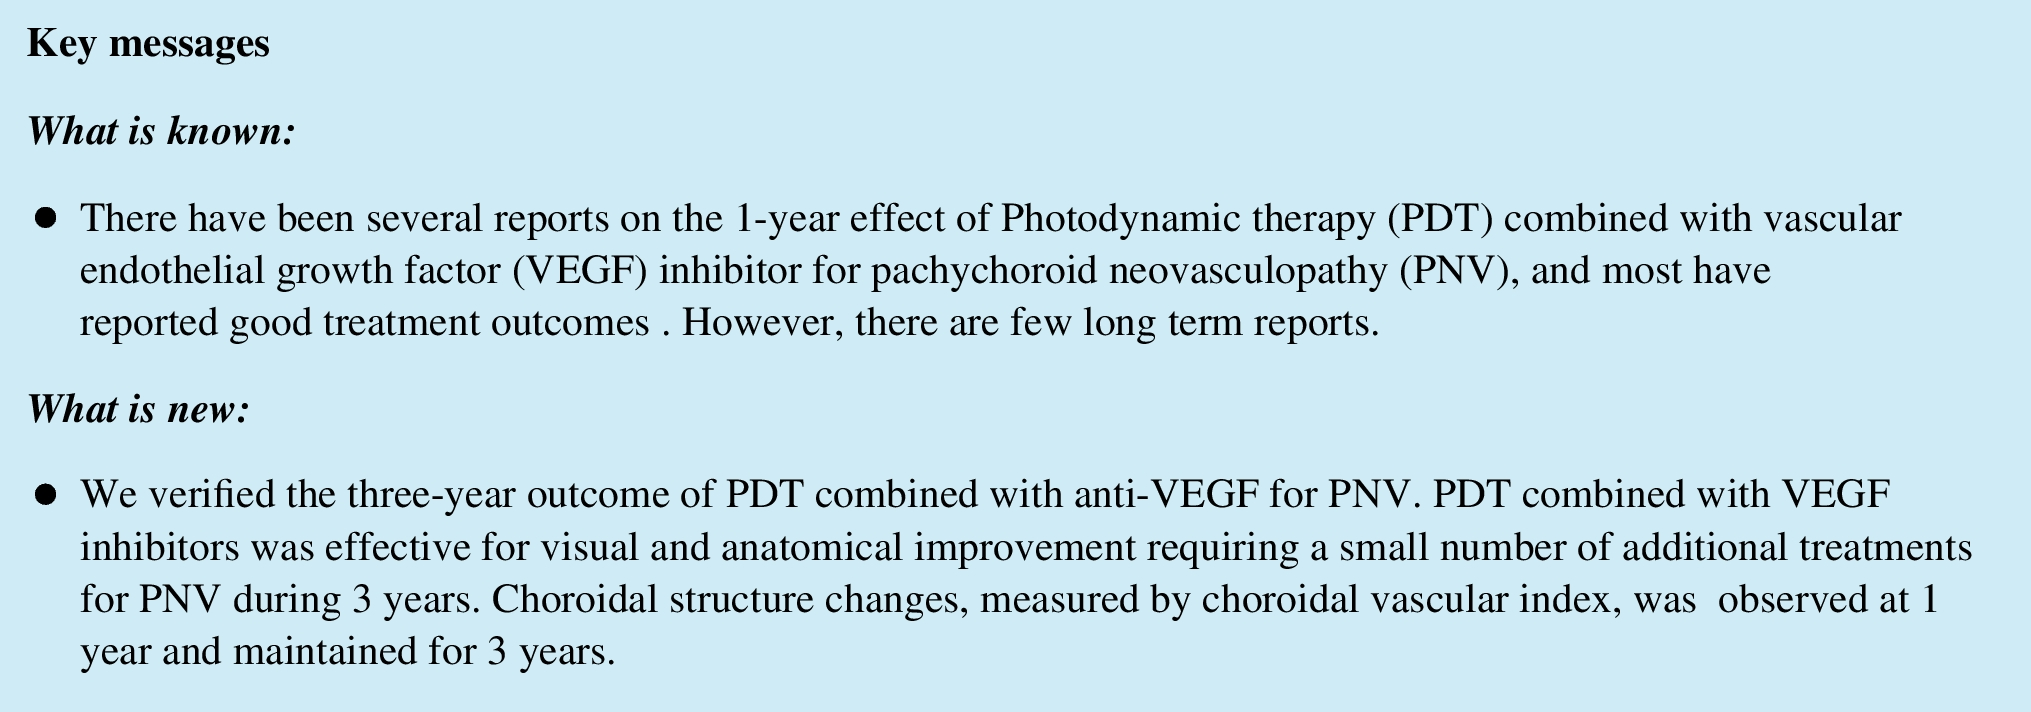 Three-year outcome of photodynamic therapy combined with VEGF inhibitor for pachychoroid neovasculopathy